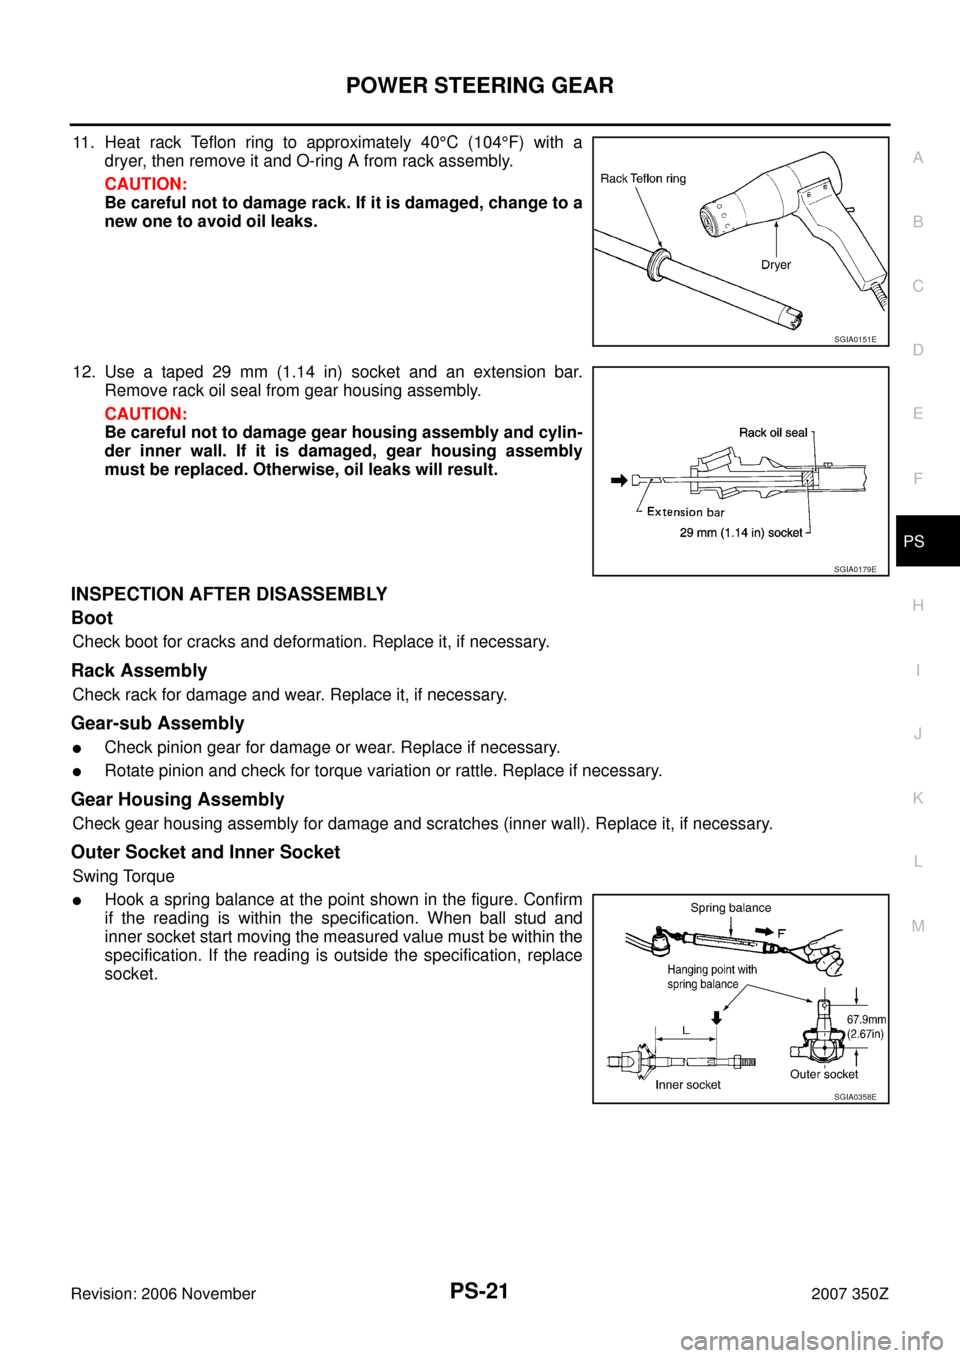 NISSAN 350Z 2007 Z33 Power Steering System Workshop Manual POWER STEERING GEAR
PS-21
C
D
E
F
H
I
J
K
L
MA
B
PS
Revision: 2006 November2007 350Z
11. Heat rack Teflon ring to approximately 40°C (104°F) with a
dryer, then remove it and O-ring A from rack assem